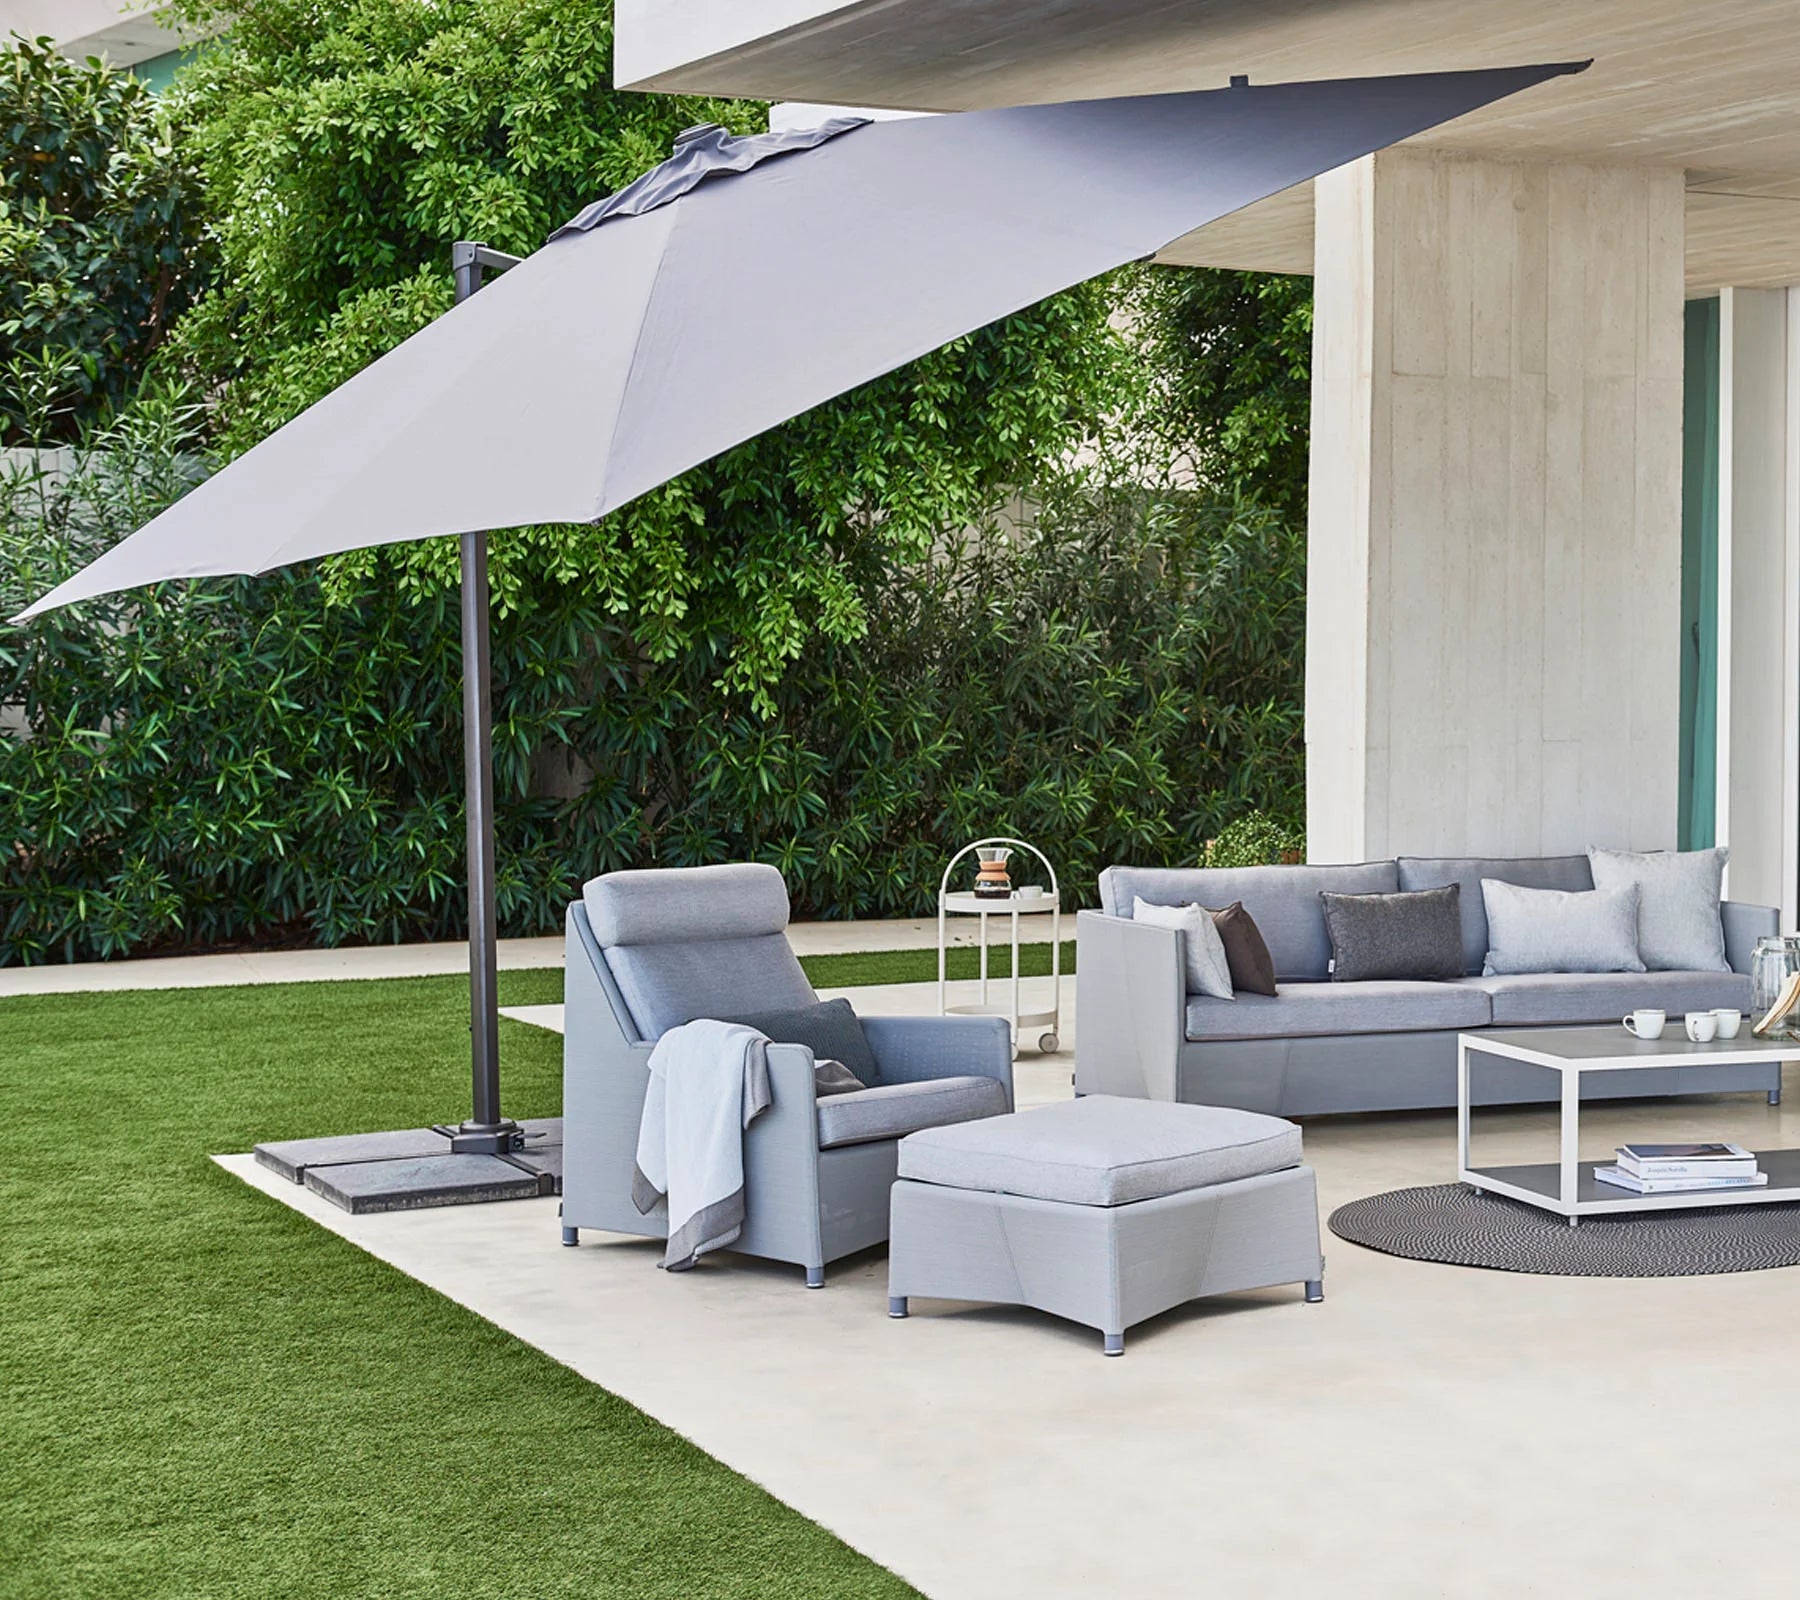 Boxhill's Hyde Luxe Tilt Aluminum Parasol | 3x3 m lifestyle image with 3-seater sofa, lounge chair and footstool at patio